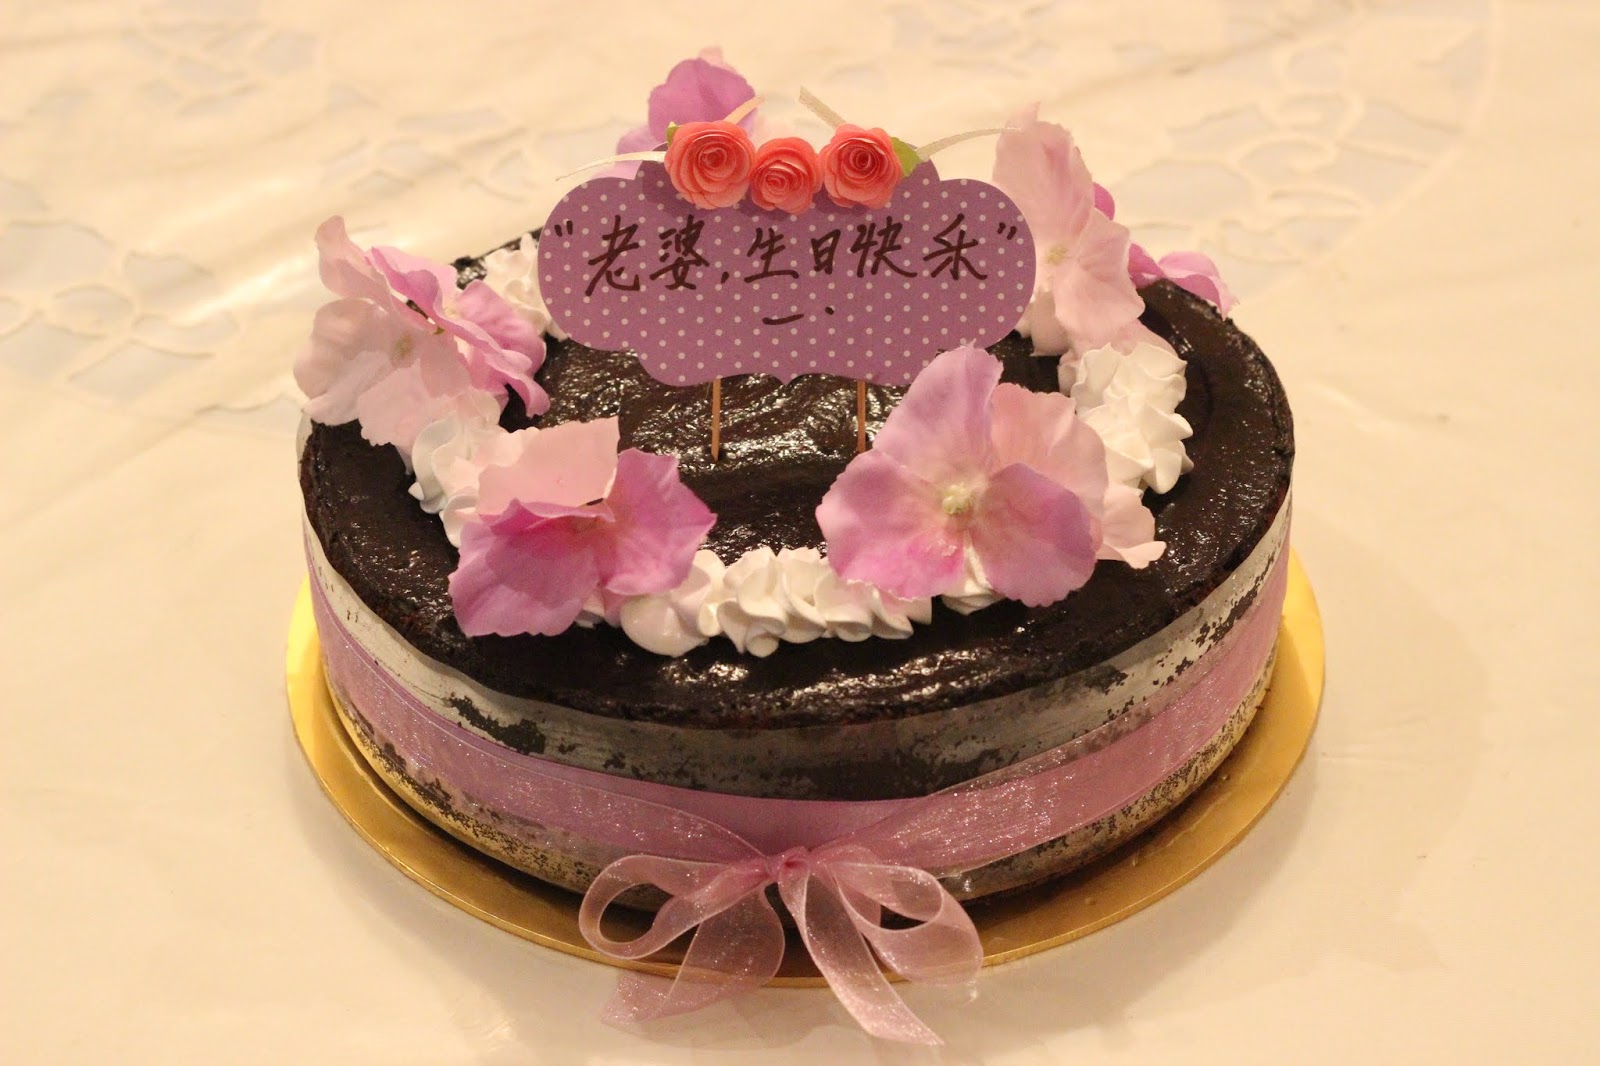 Lily Homemade Cakes Ipoh 012-5057972 www.lilyhomema